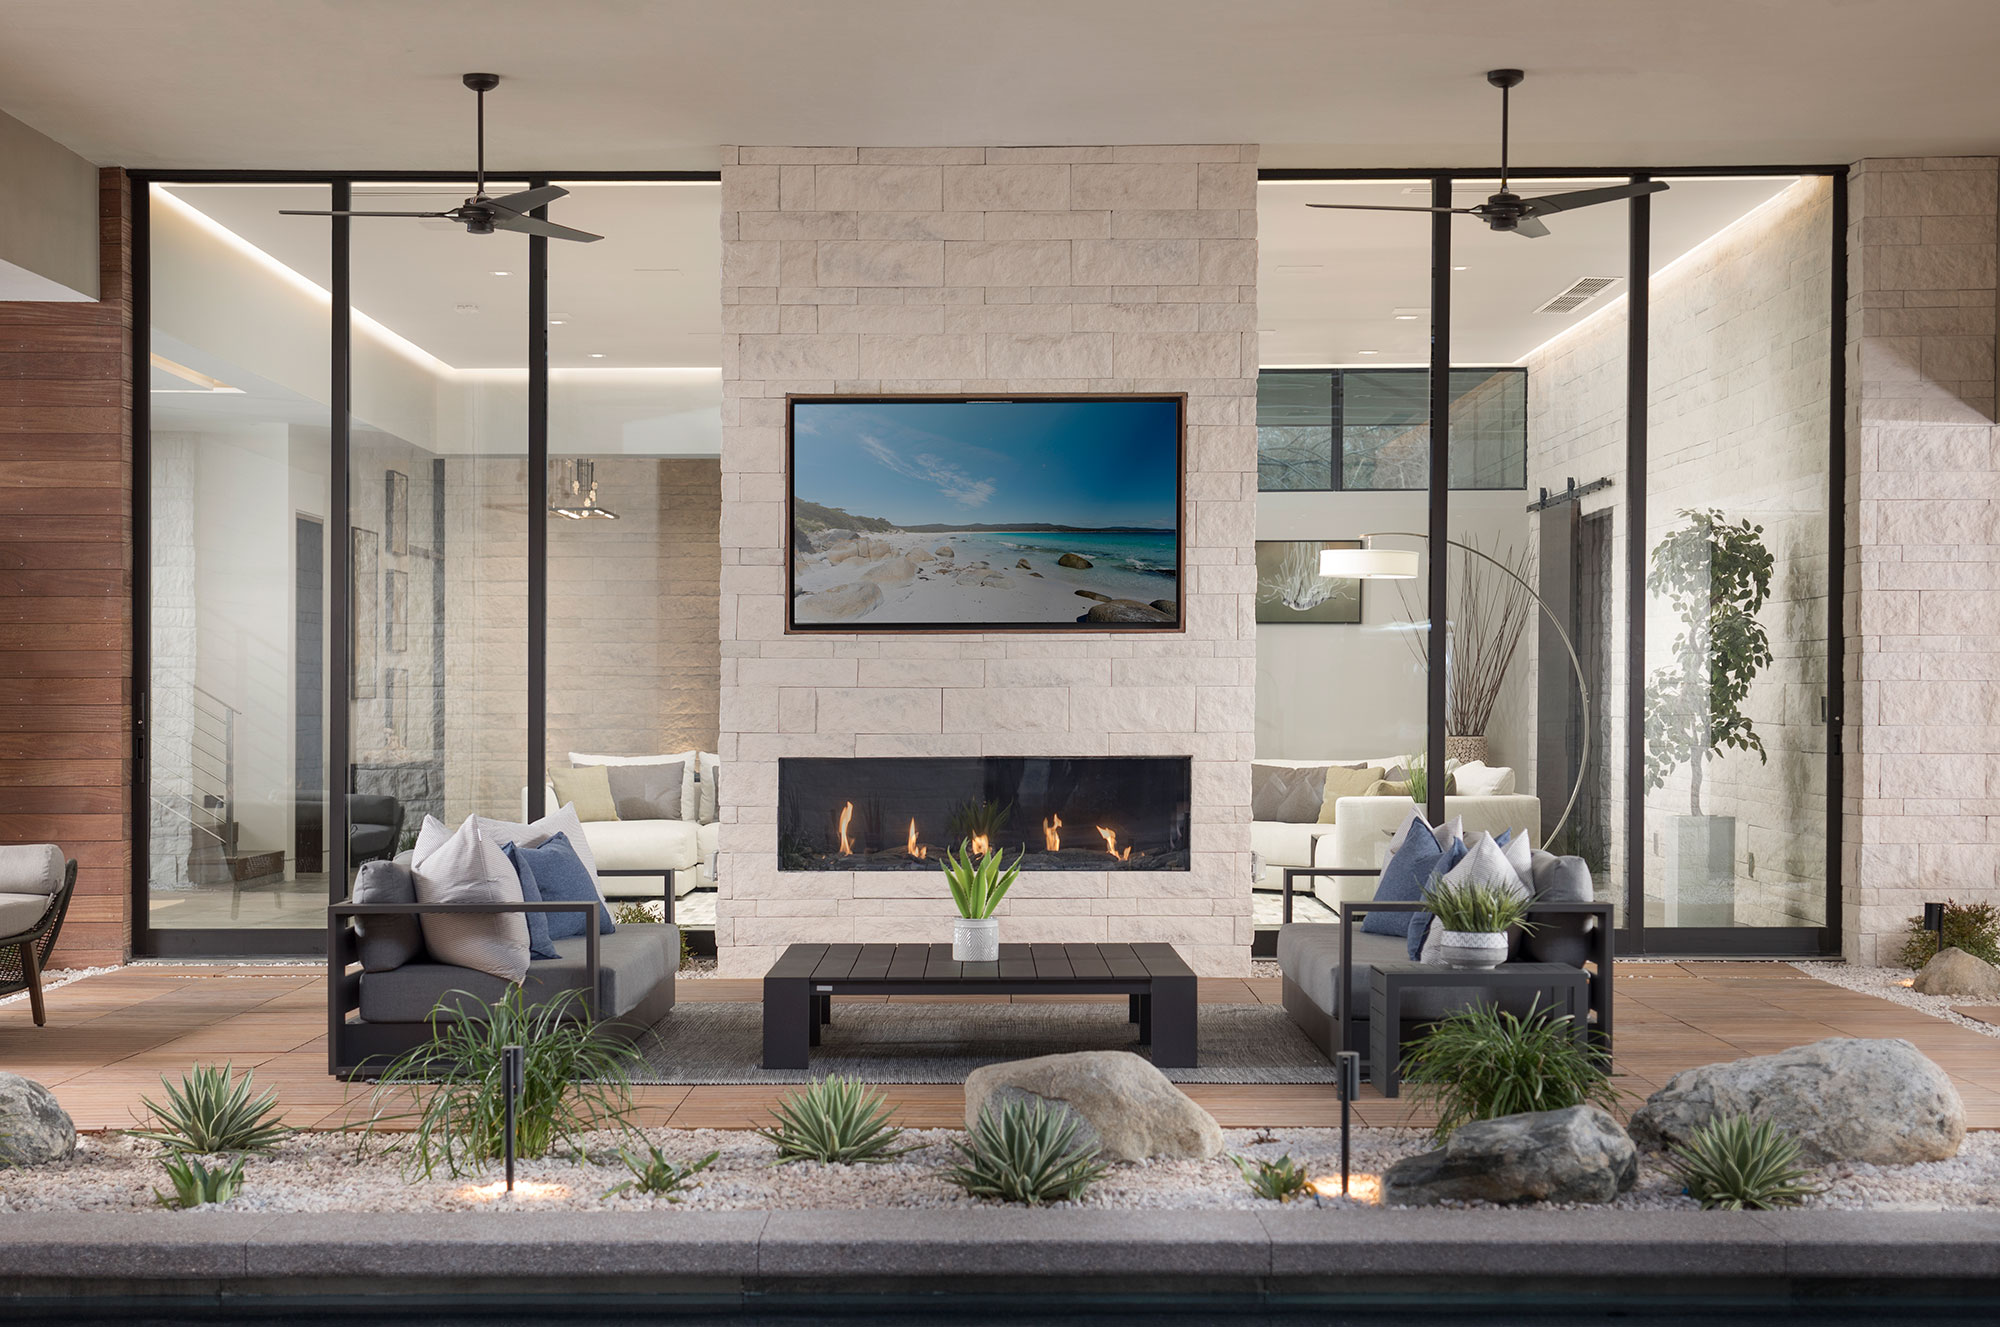 Two massive, floor-to-ceiling multi-slide doors surround an outdoor fireplace.